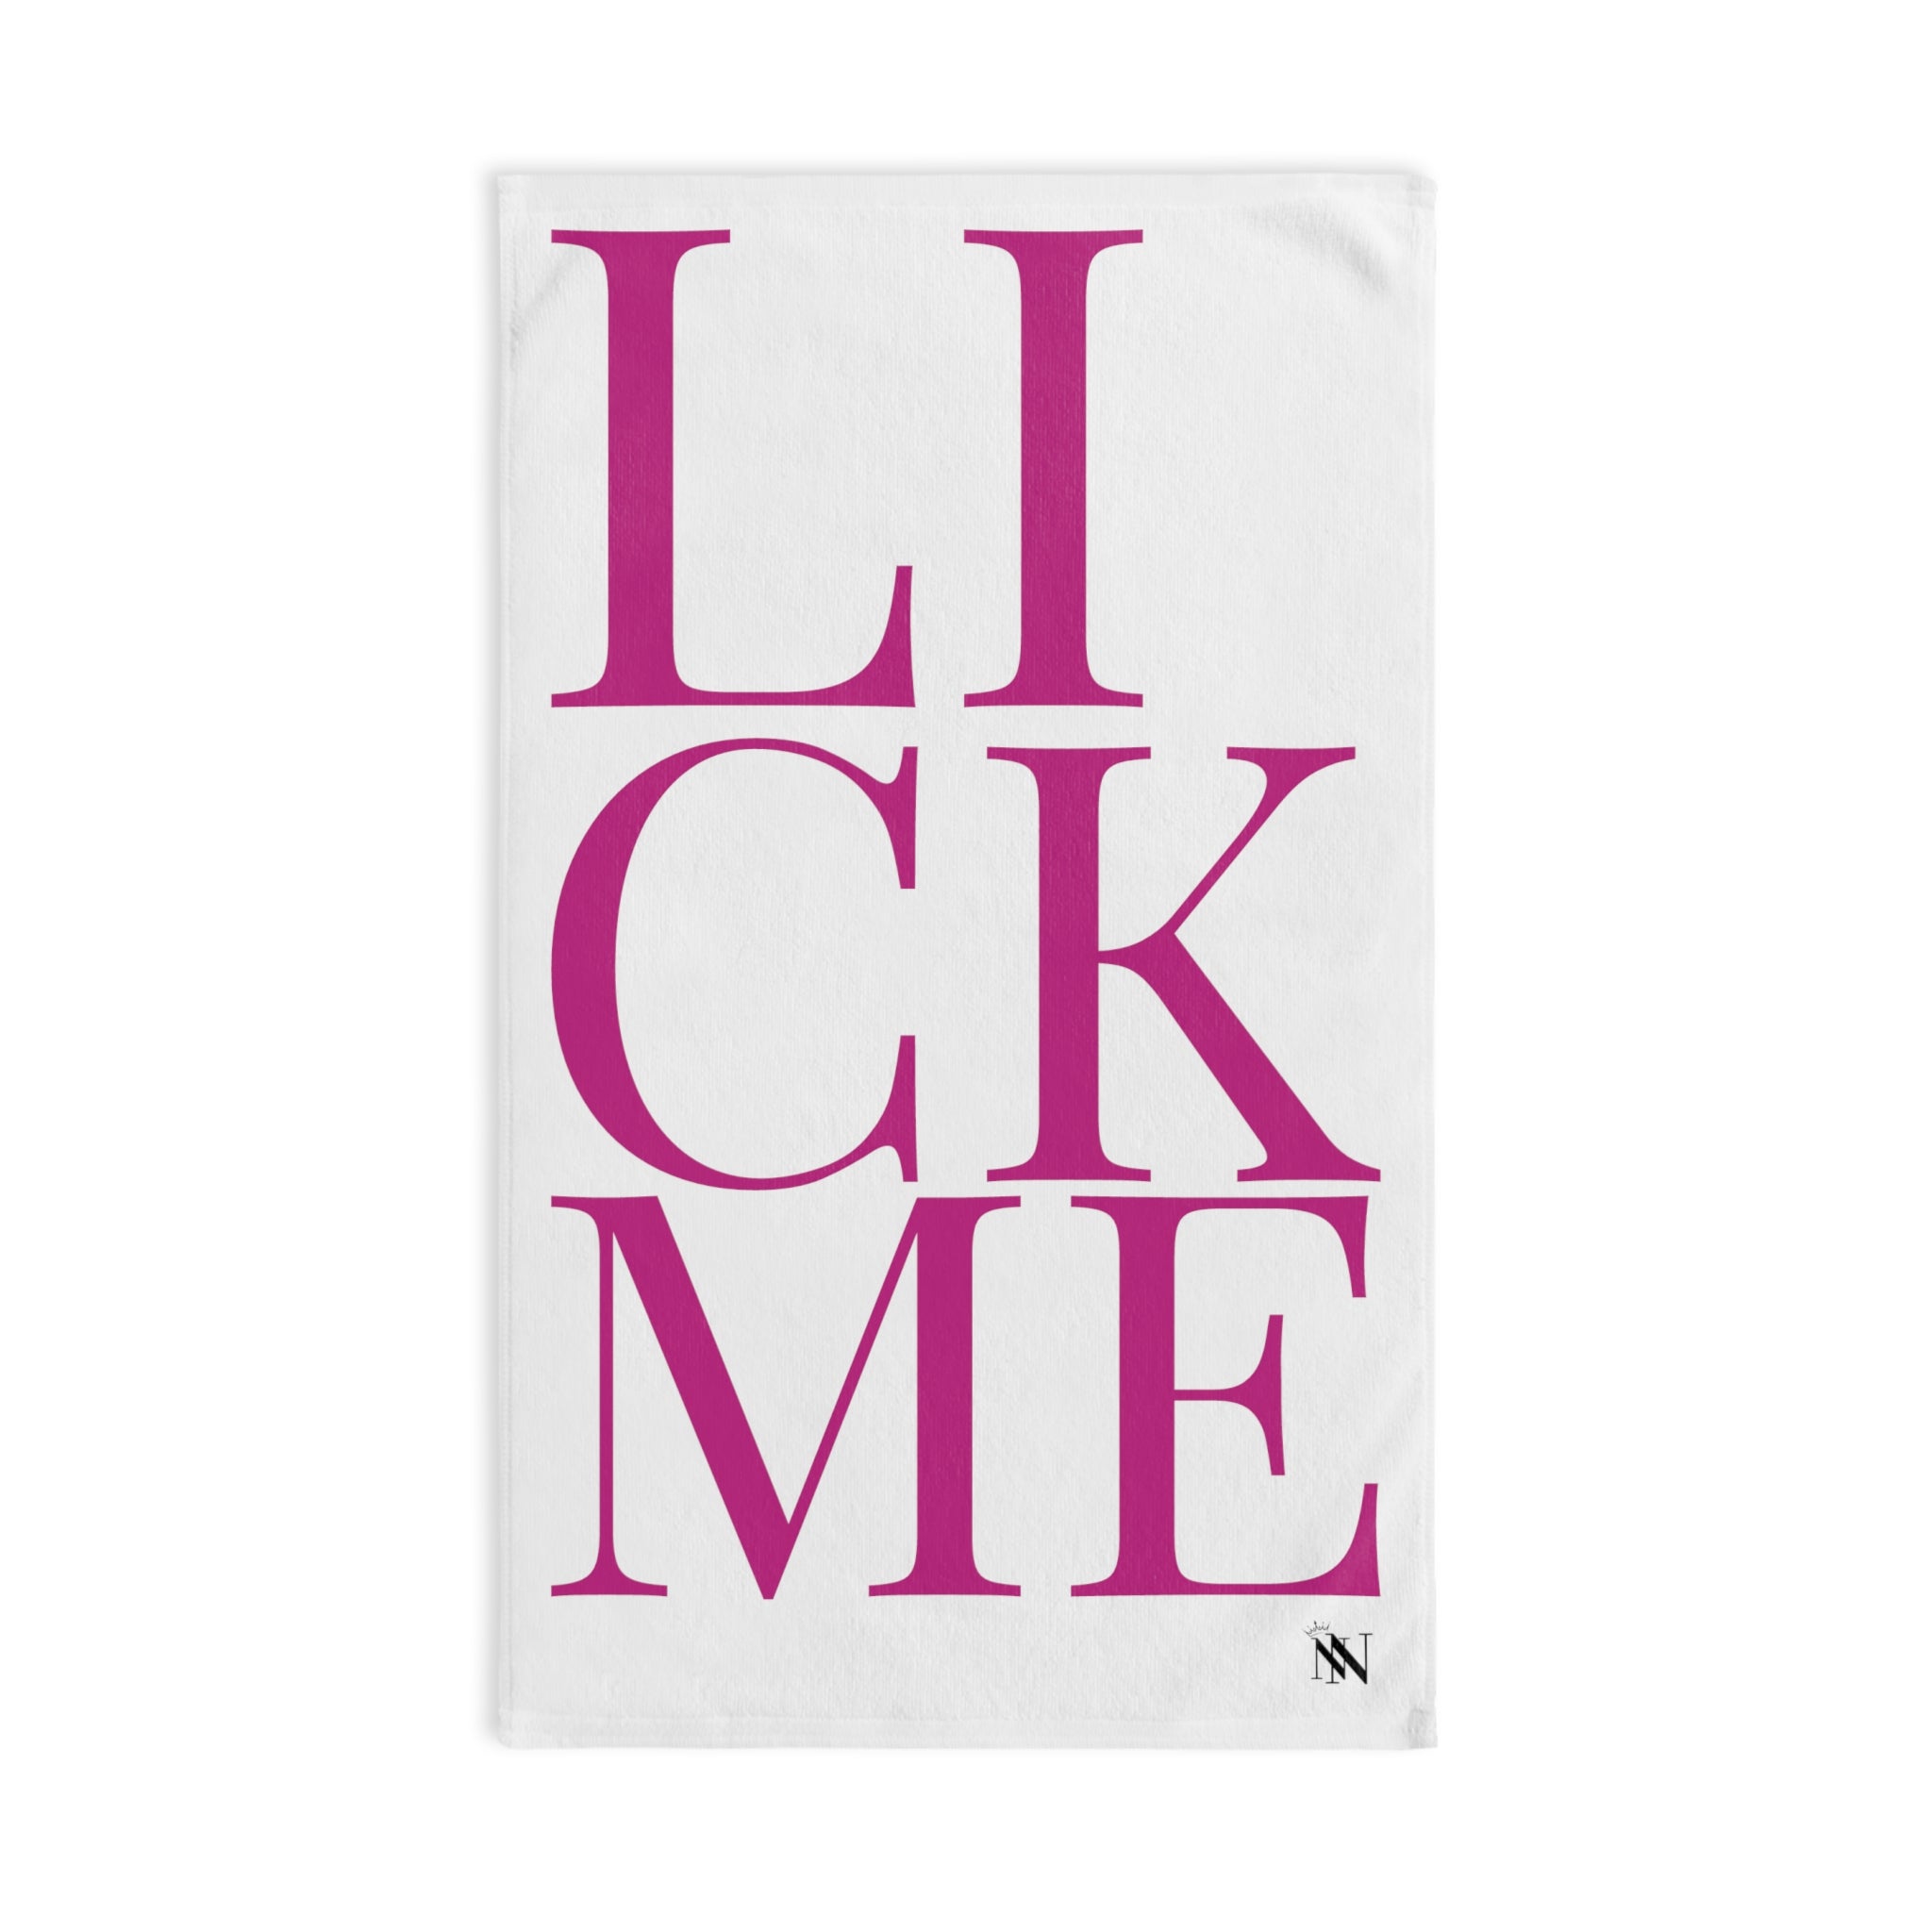 Lick Me FusciaWhite | Funny Gifts for Men - Gifts for Him - Birthday Gifts for Men, Him, Her, Husband, Boyfriend, Girlfriend, New Couple Gifts, Fathers & Valentines Day Gifts, Christmas Gifts NECTAR NAPKINS